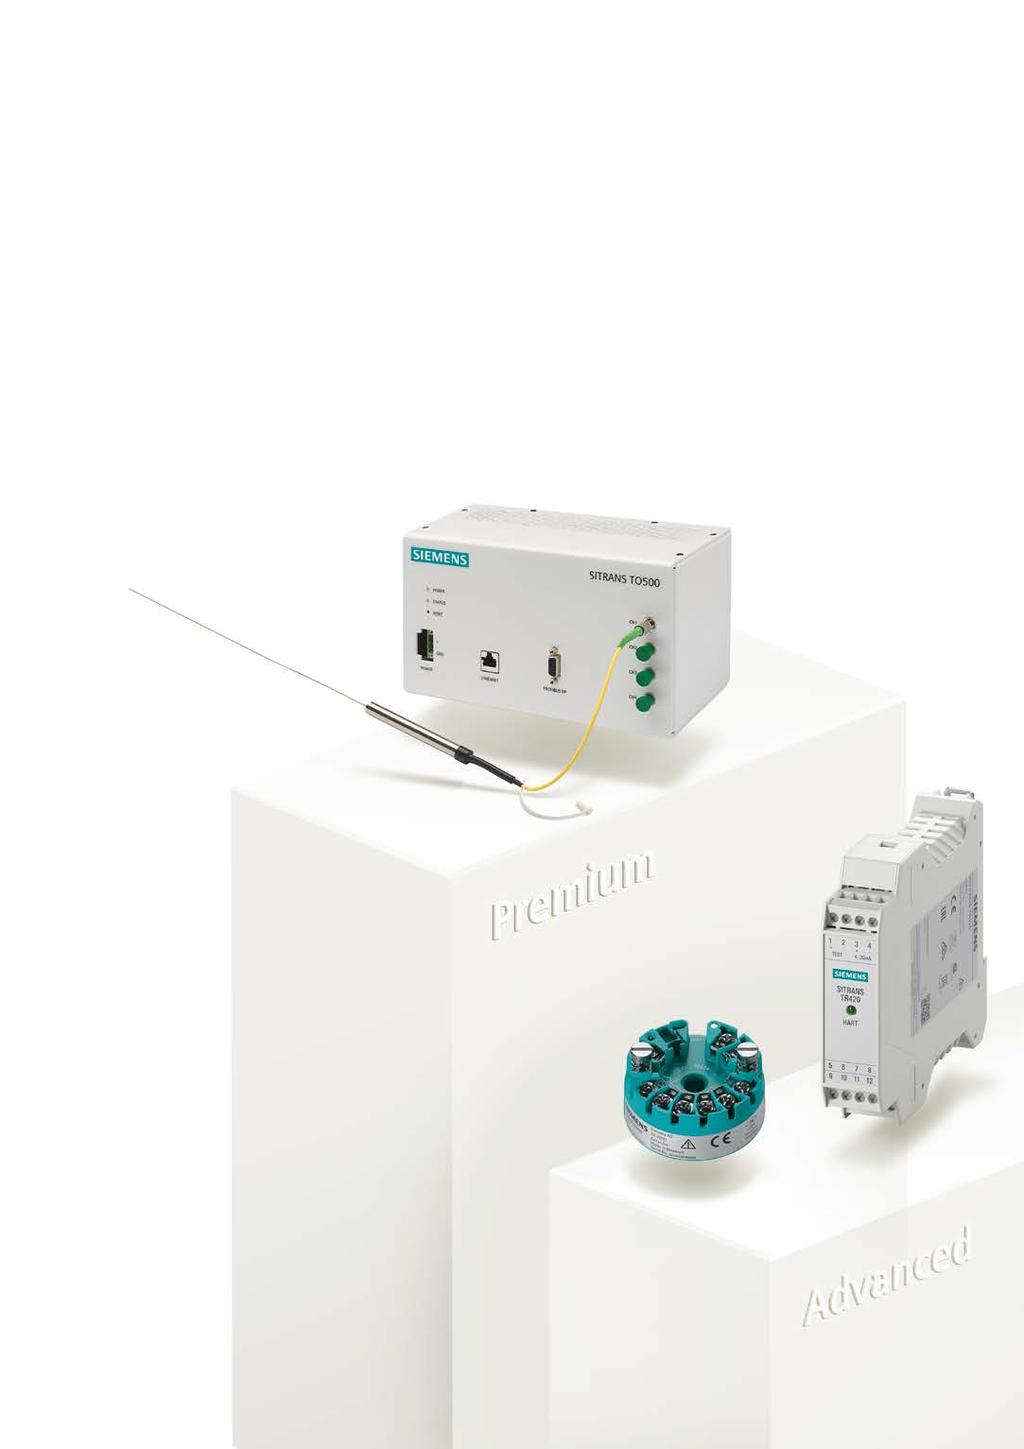 SITRANS T temperature measurement As the perfect basis for highly precise and reliable temperature measurements, the solutions in the SITRANS T family are a good choice for a wide range of